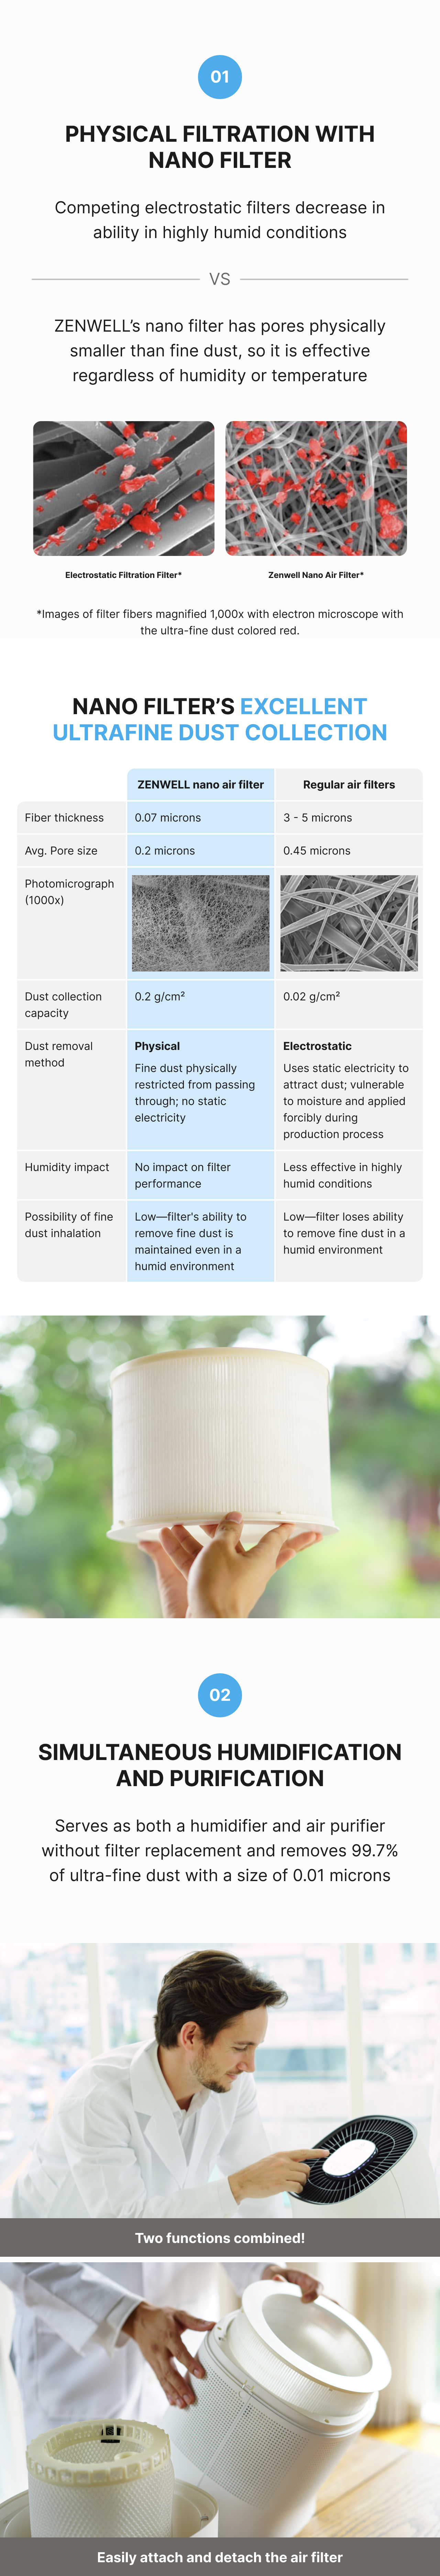 Super Air Purifier and Humidifier Smart product description image explaining how the nano filter has pores smaller than fine dust itself, making it physically impervious to dust regardless of humidity or temperature. This makes Zenwell outperform common electrostatic purifiers in many ways described in a table. Also it serves as both a humidifier and air purifier without filter replacement and removes 99.7% of ultra-fine dust with a size of 0.01 microns.